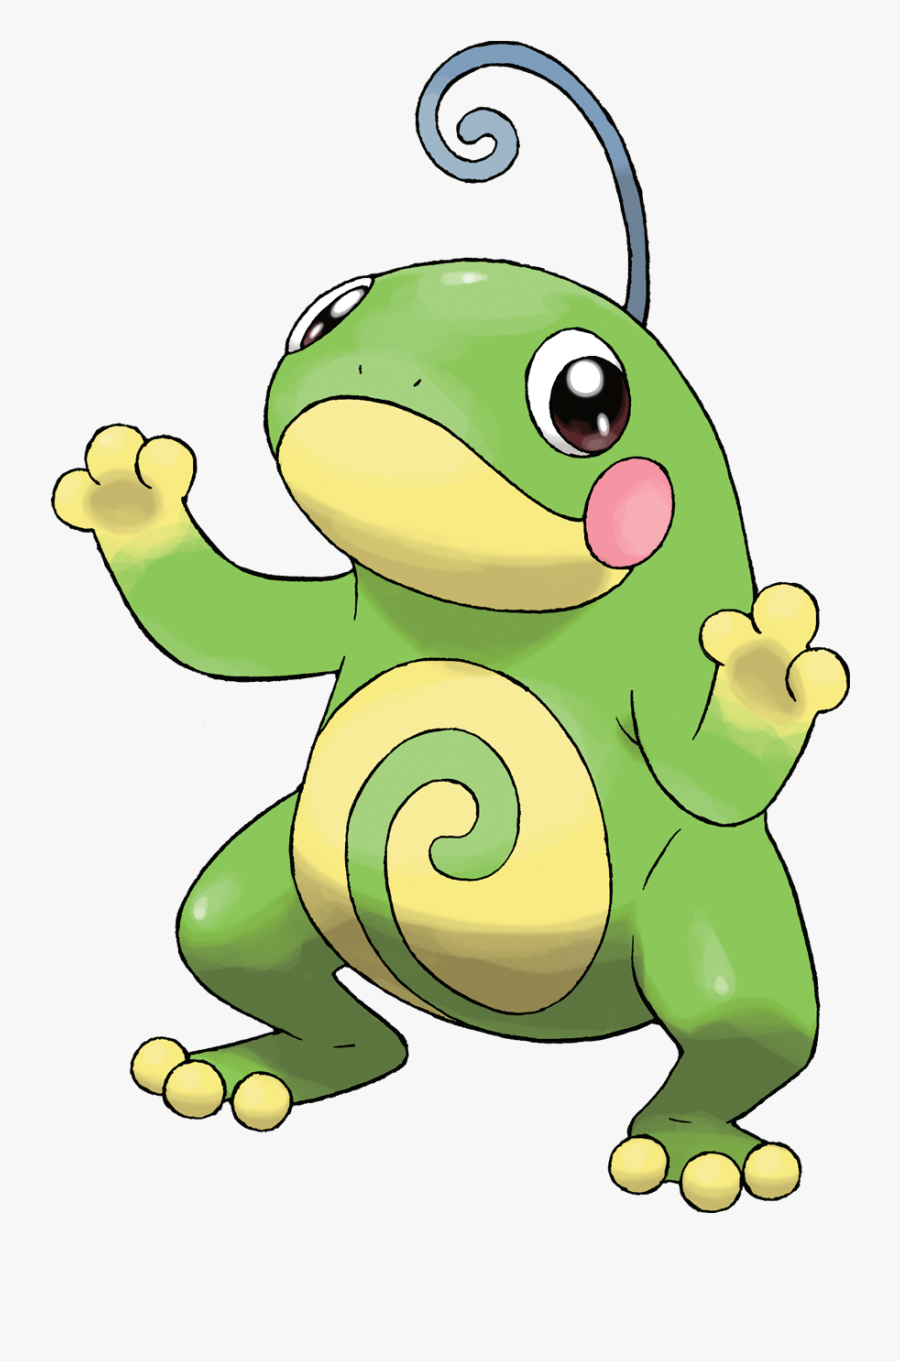 Politoed @ Choice Scarf Ability - Politoed Png, Transparent Clipart